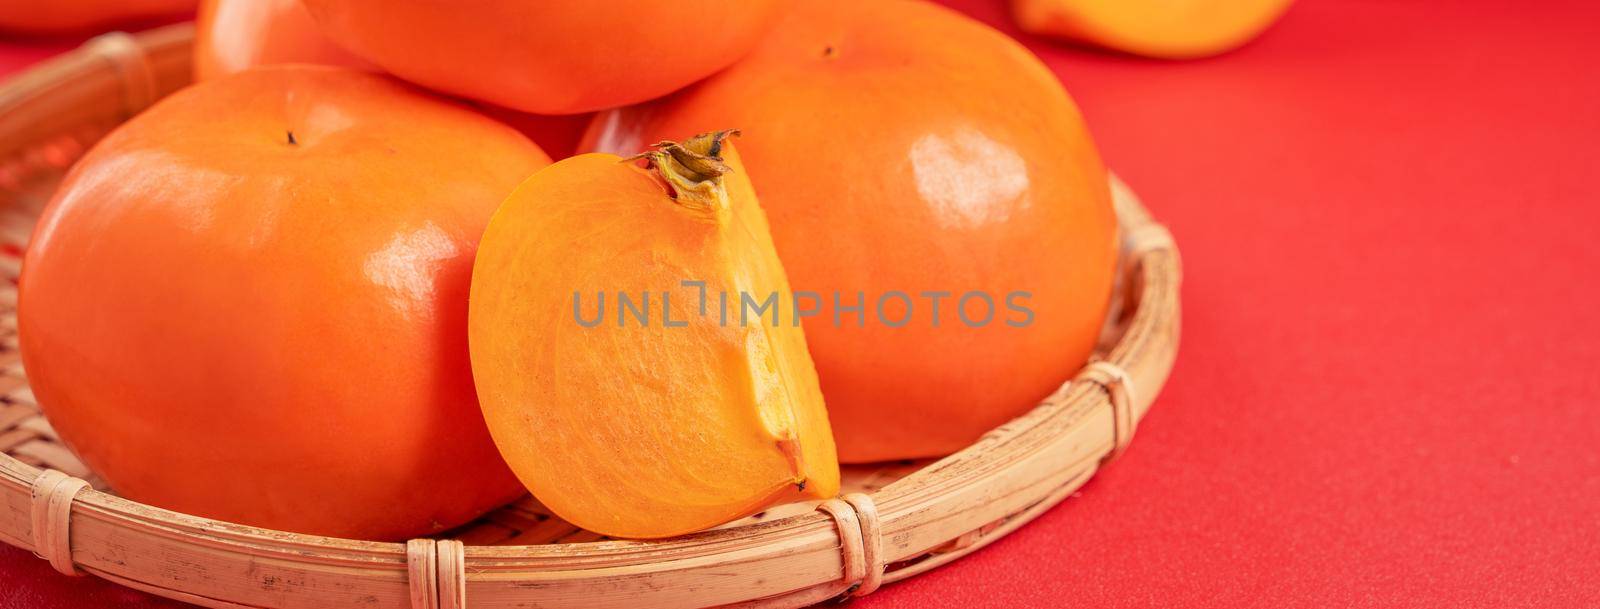 Fresh beautiful sliced sweet persimmon kaki isolated on red table background and bamboo sieve, Chinese lunar new year design concept, close up.